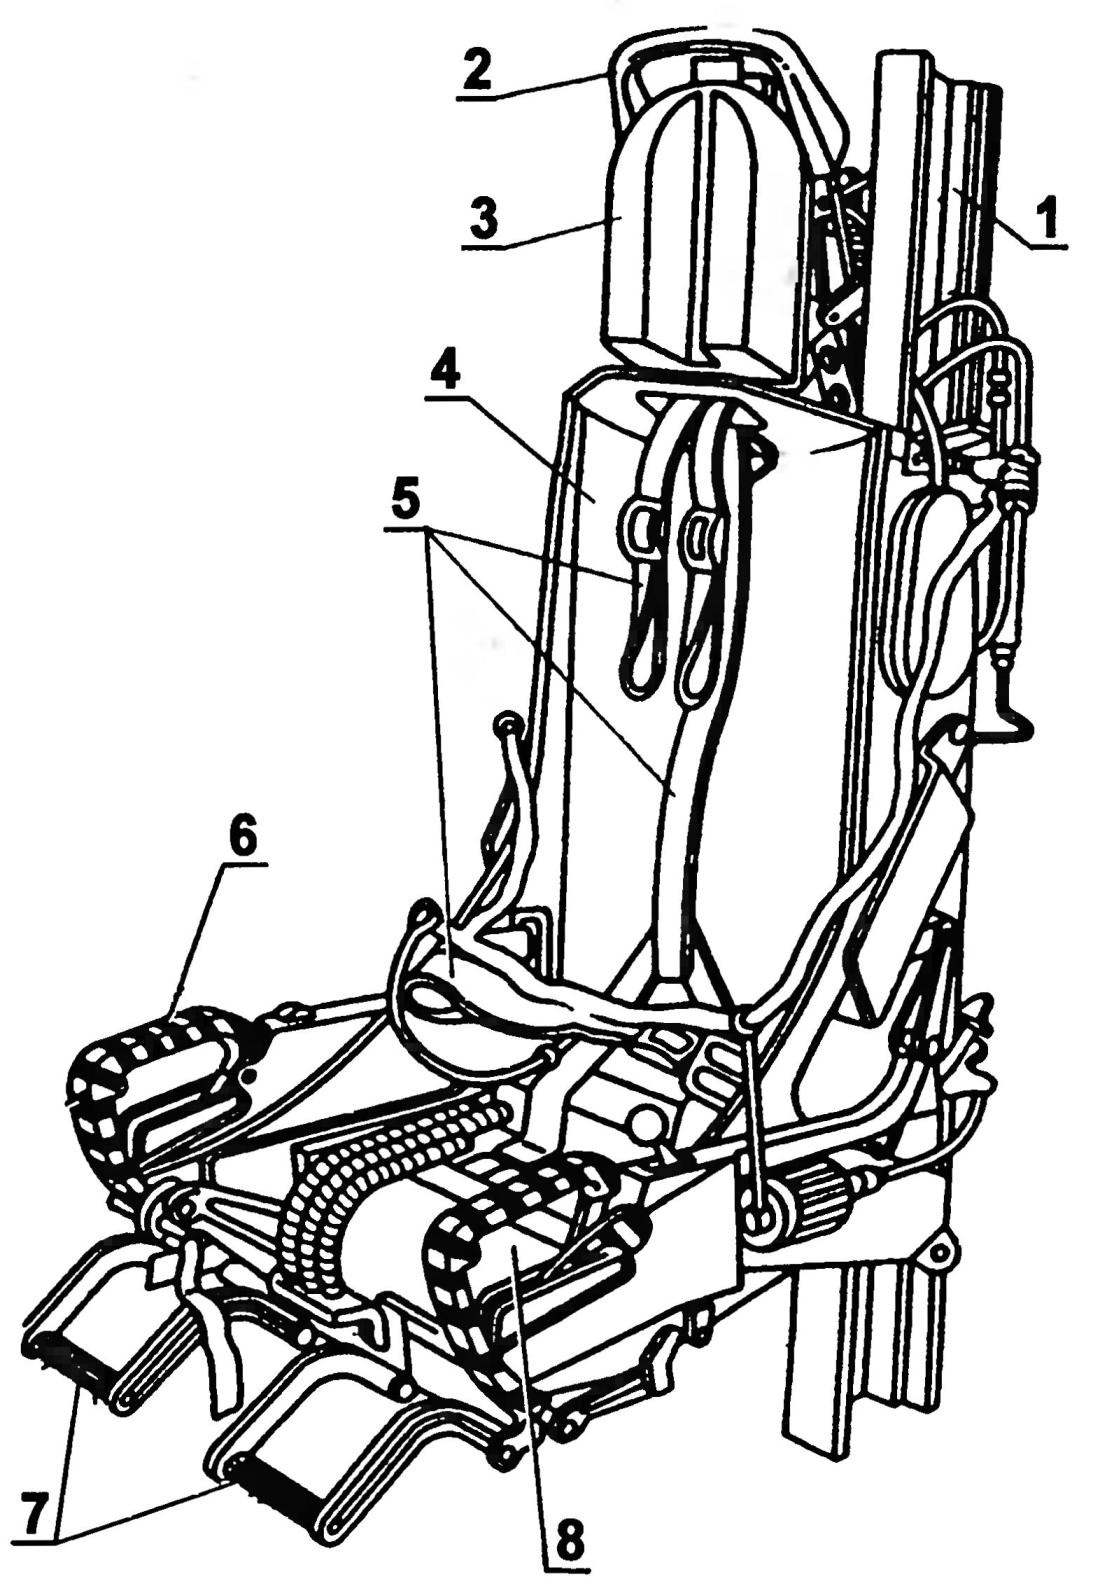 Fig. 2. Ejection seat pilot